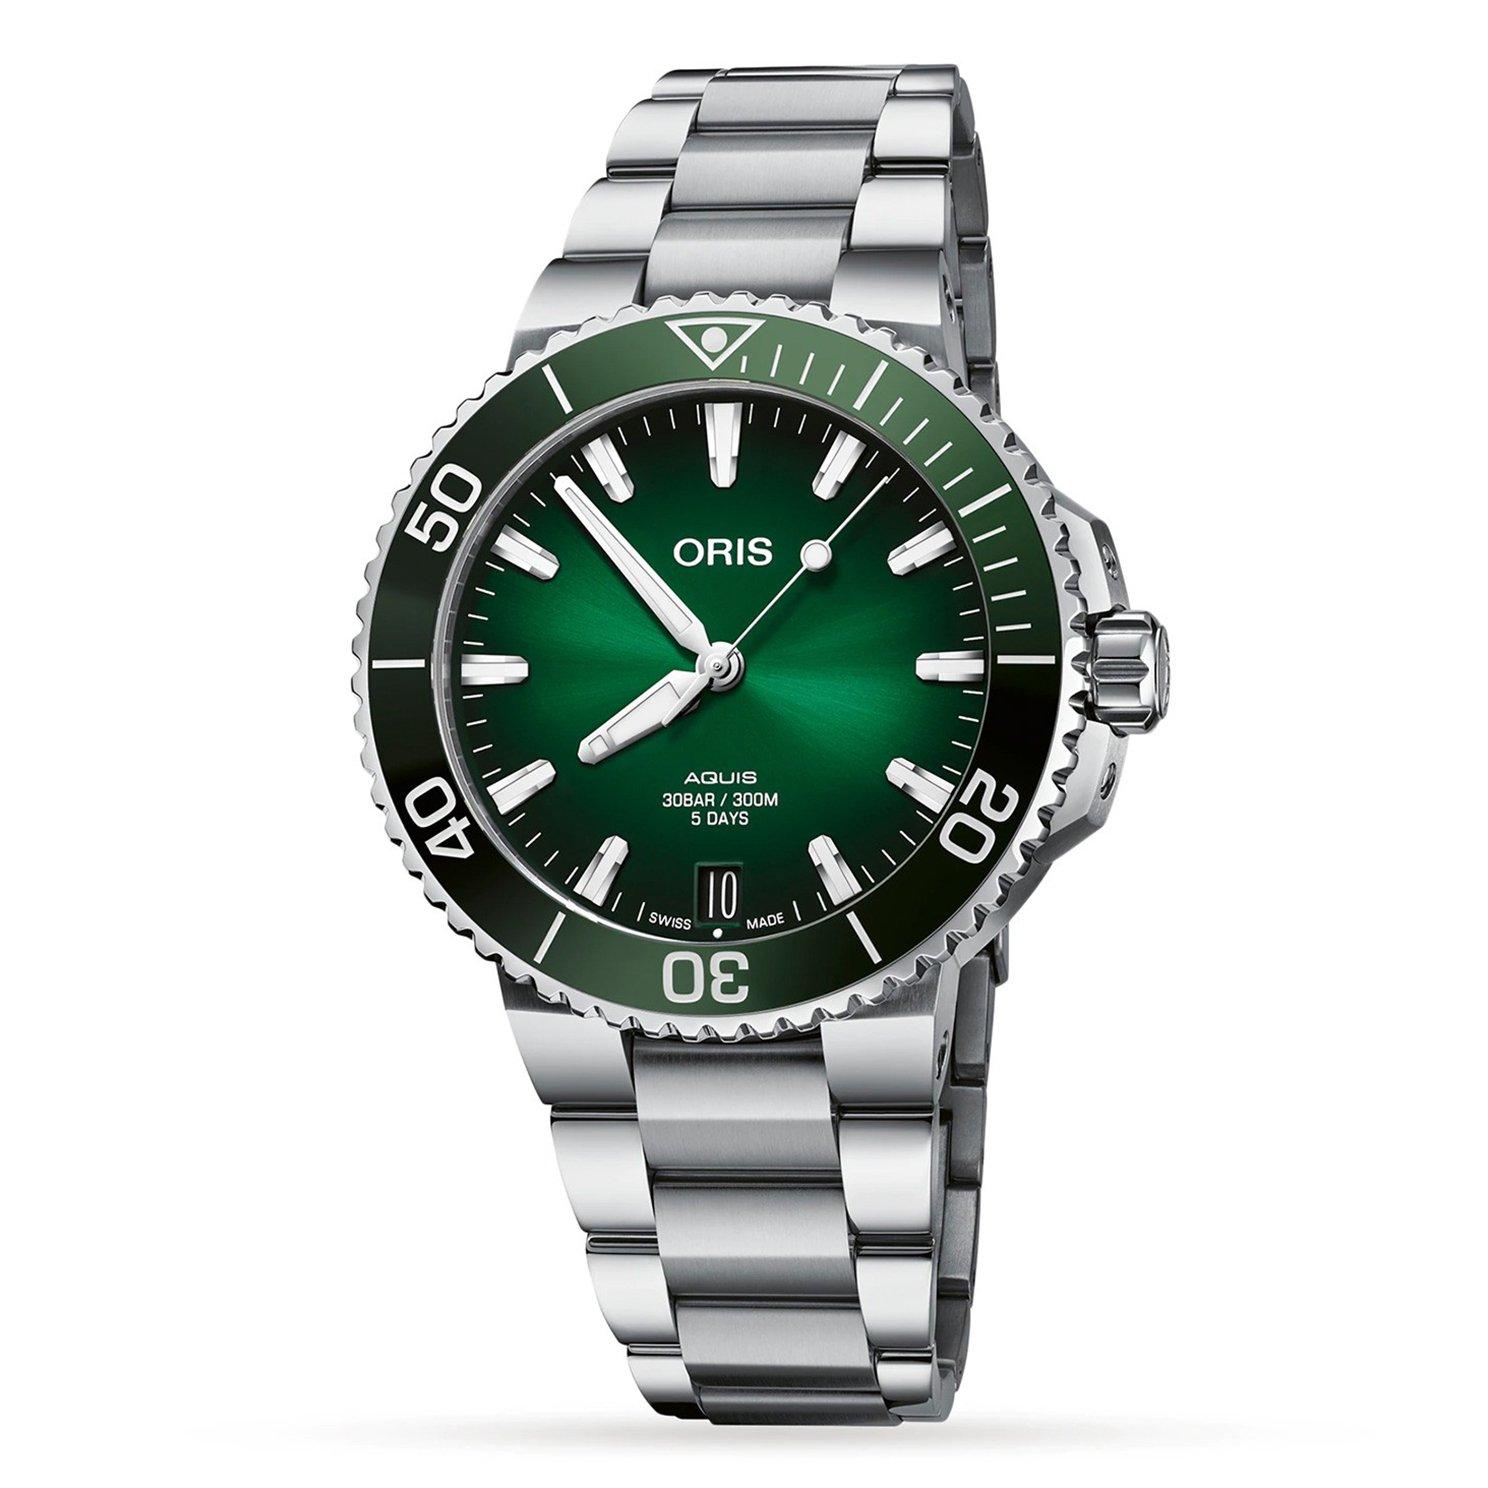 Oris Aquis Stainless Steel Green Automatic Watch